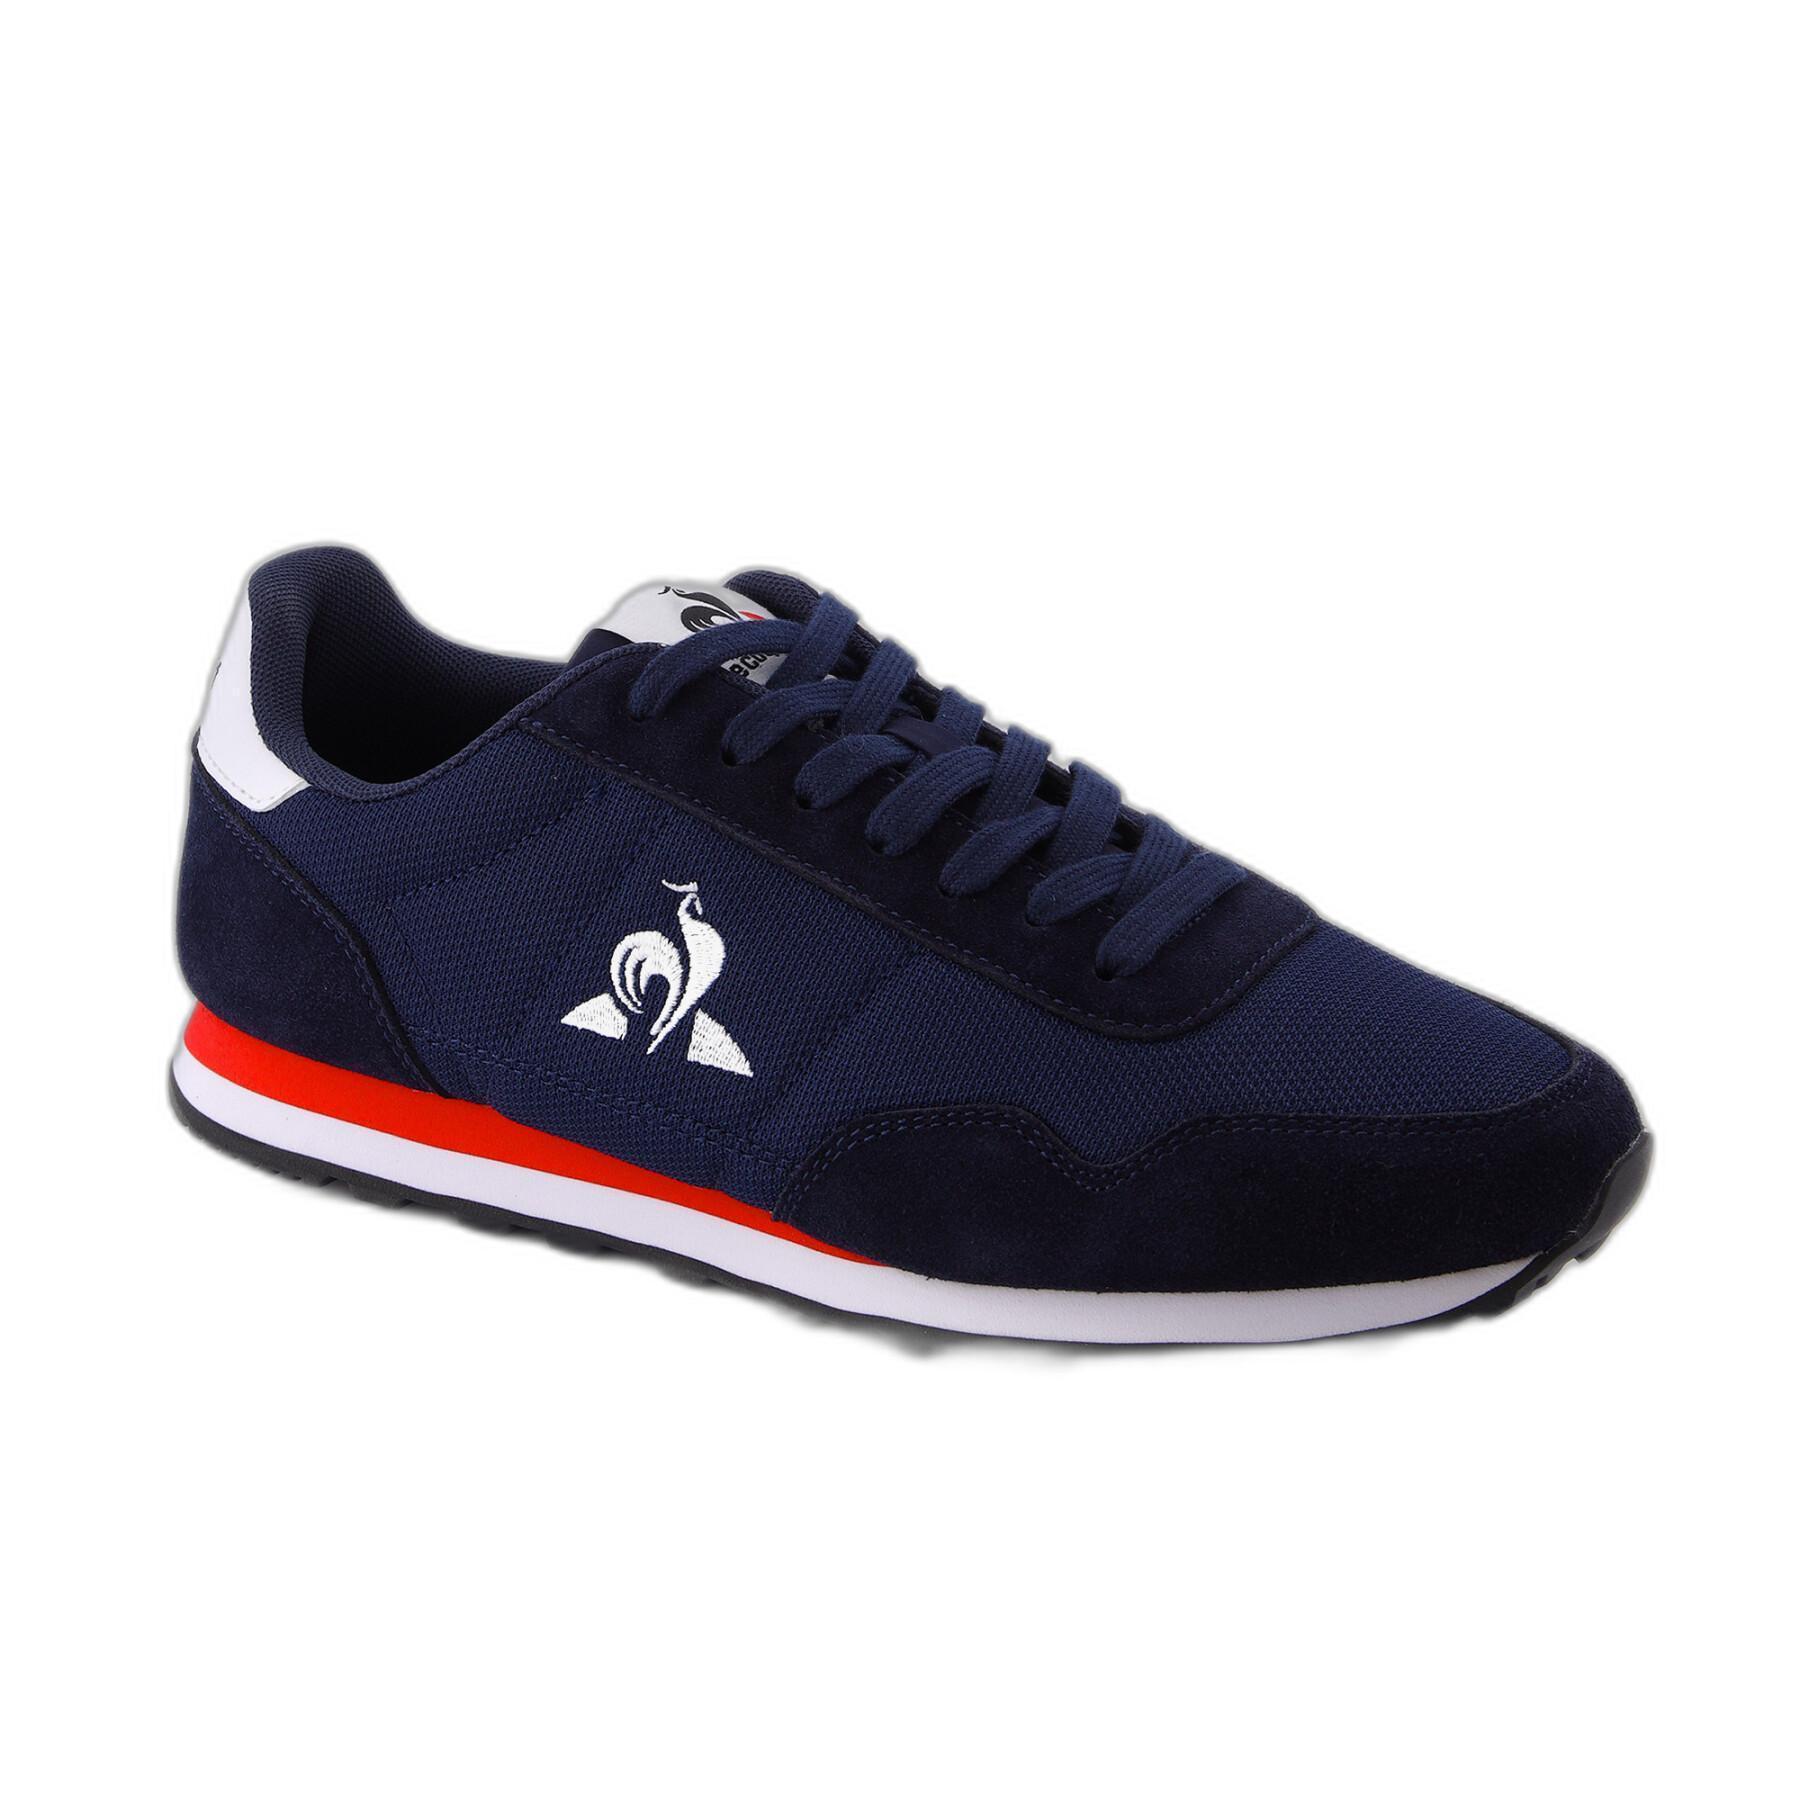 Trainers Le Coq Sportif Astra